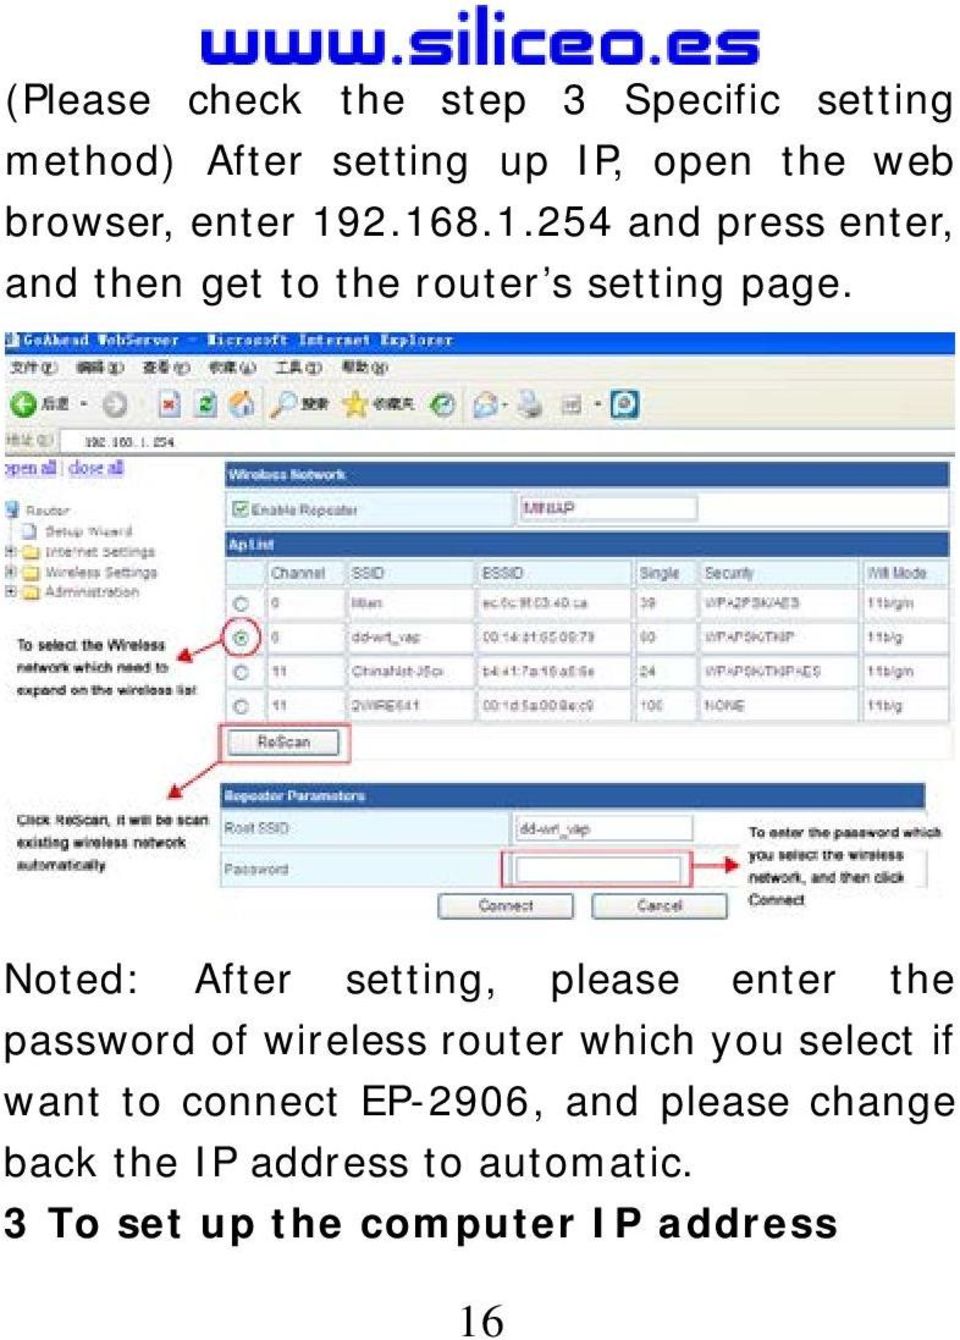 Noted: After setting, please enter the password of wireless router which you select if want